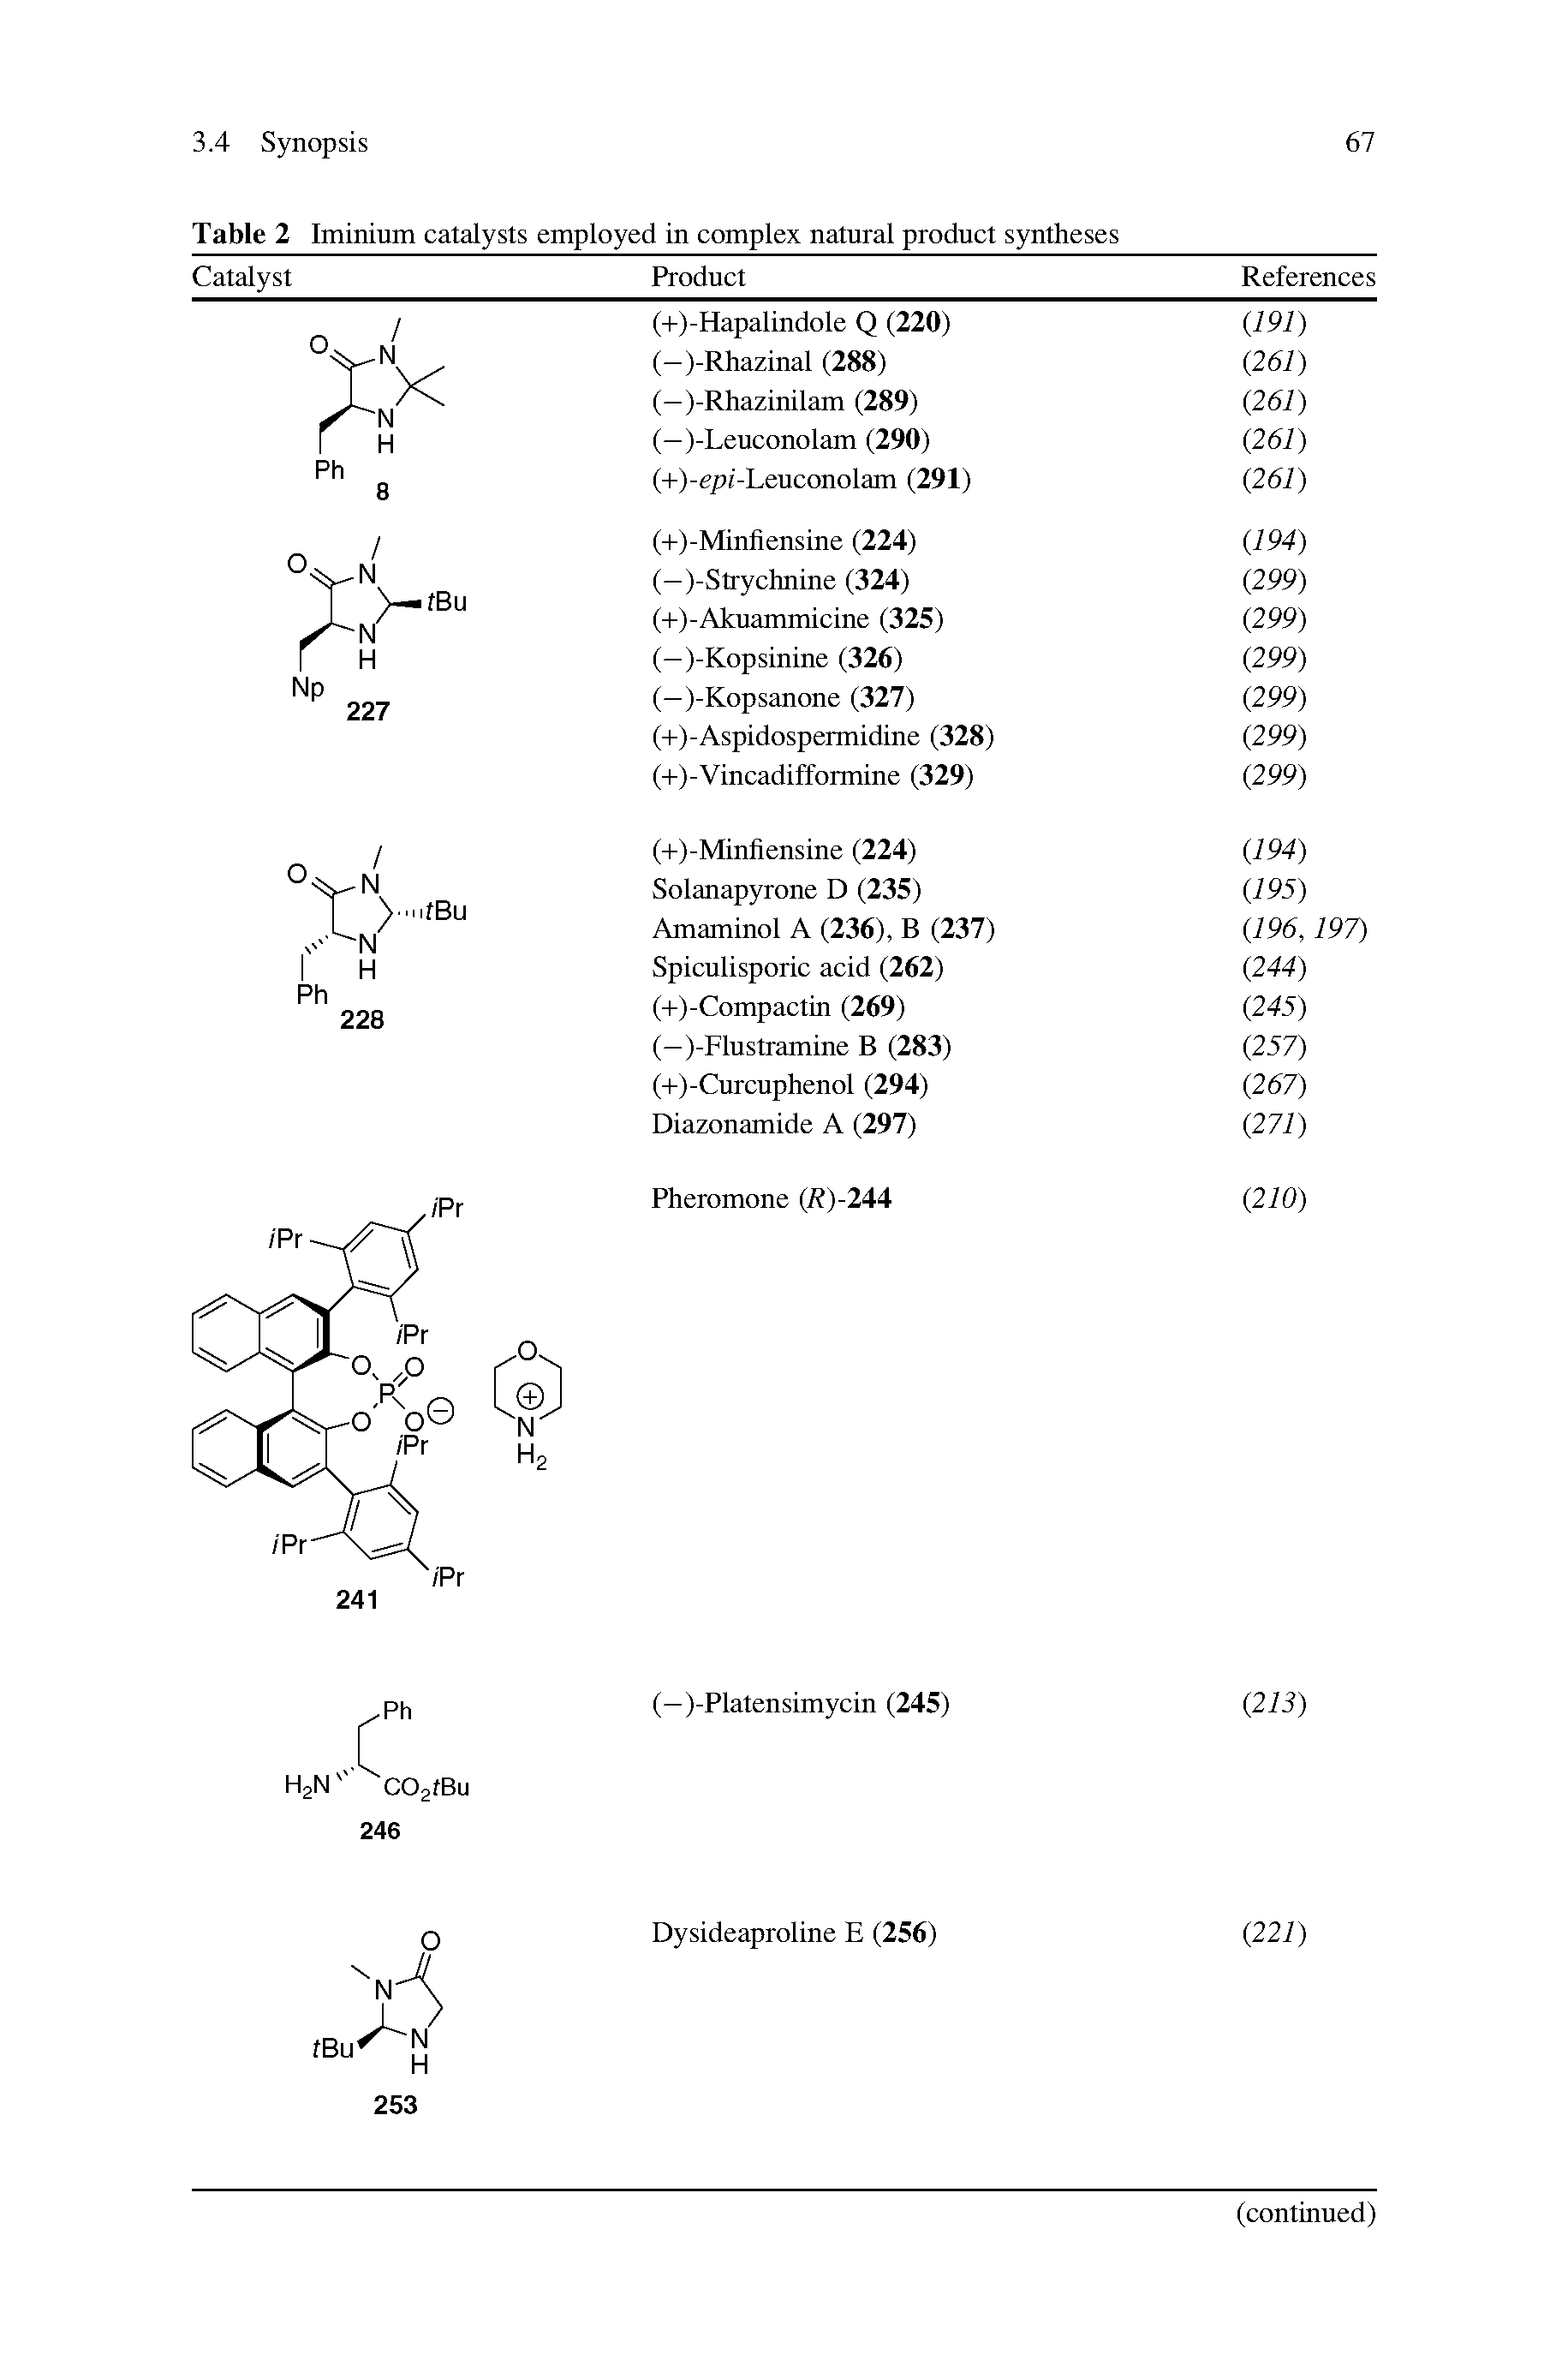 Table 2 Iminium catalysts employed in complex natural product syntheses...